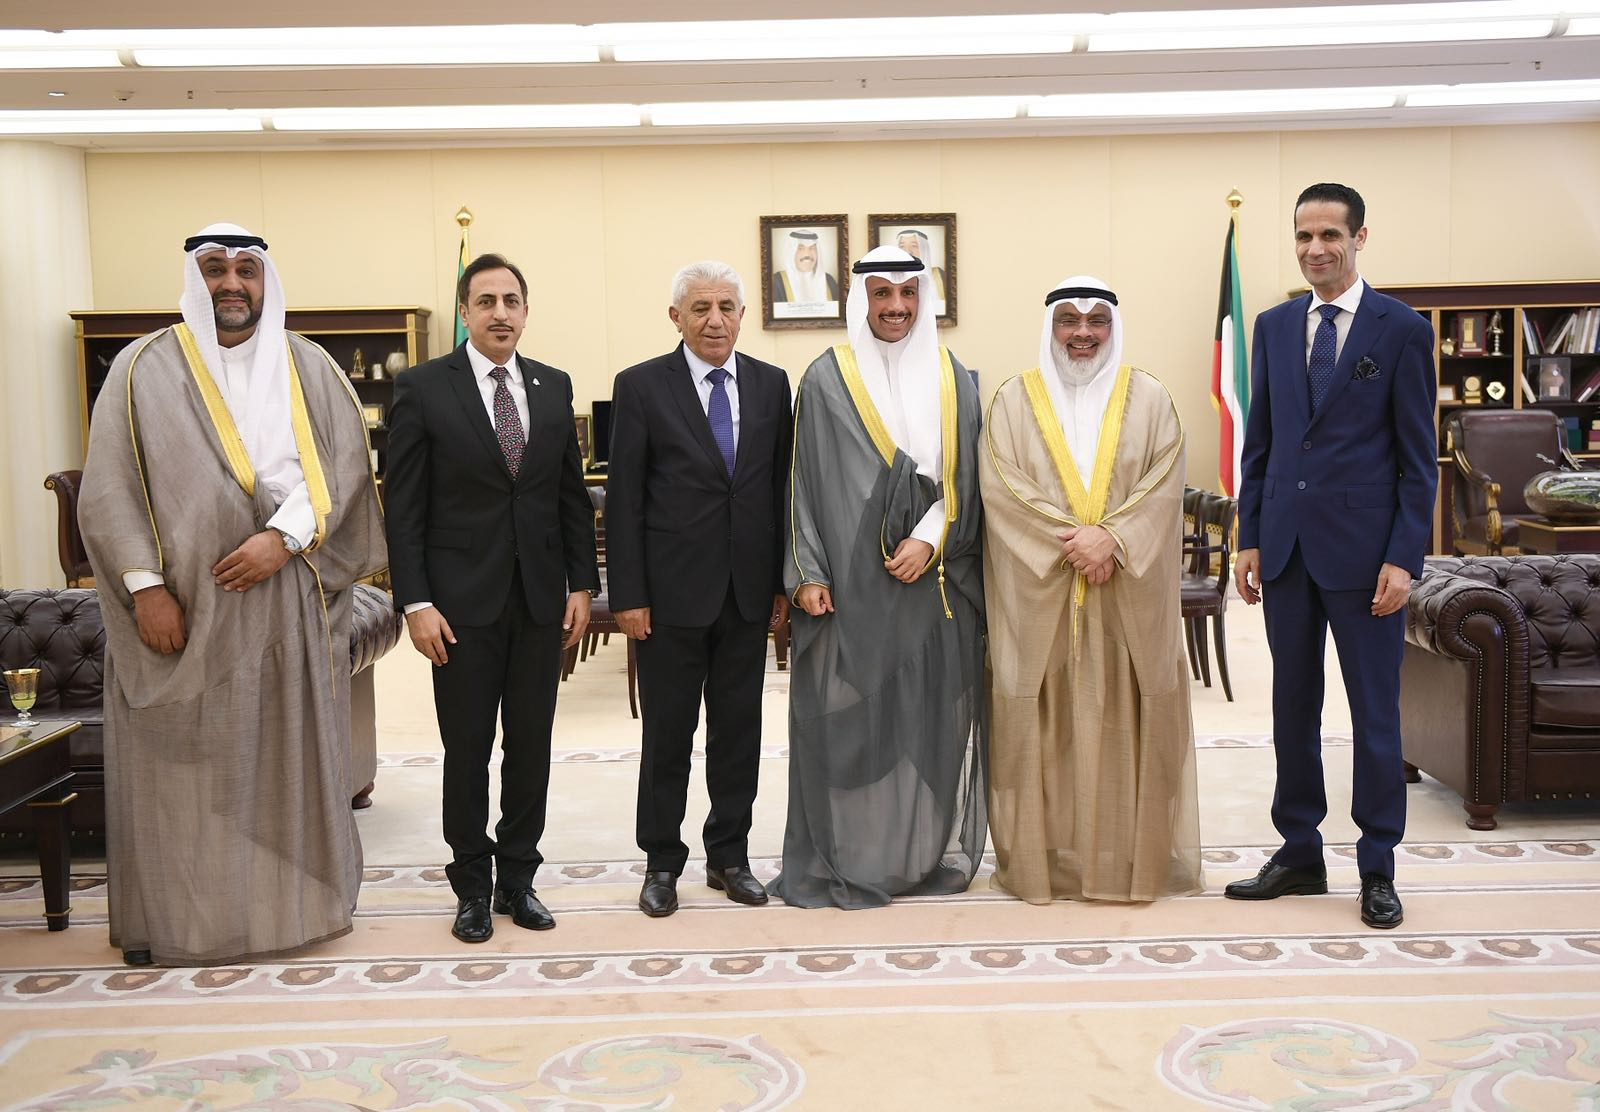 Kuwait's National Assembly Speaker Marzouq Al-Ghanim meets Deputy Chairman of the State Audit Bureau Adel Al-Sarawi, Lebanese Court of Audit Ahmad Hamdan and the head of the Audit Chamber Abdulridha Nasser